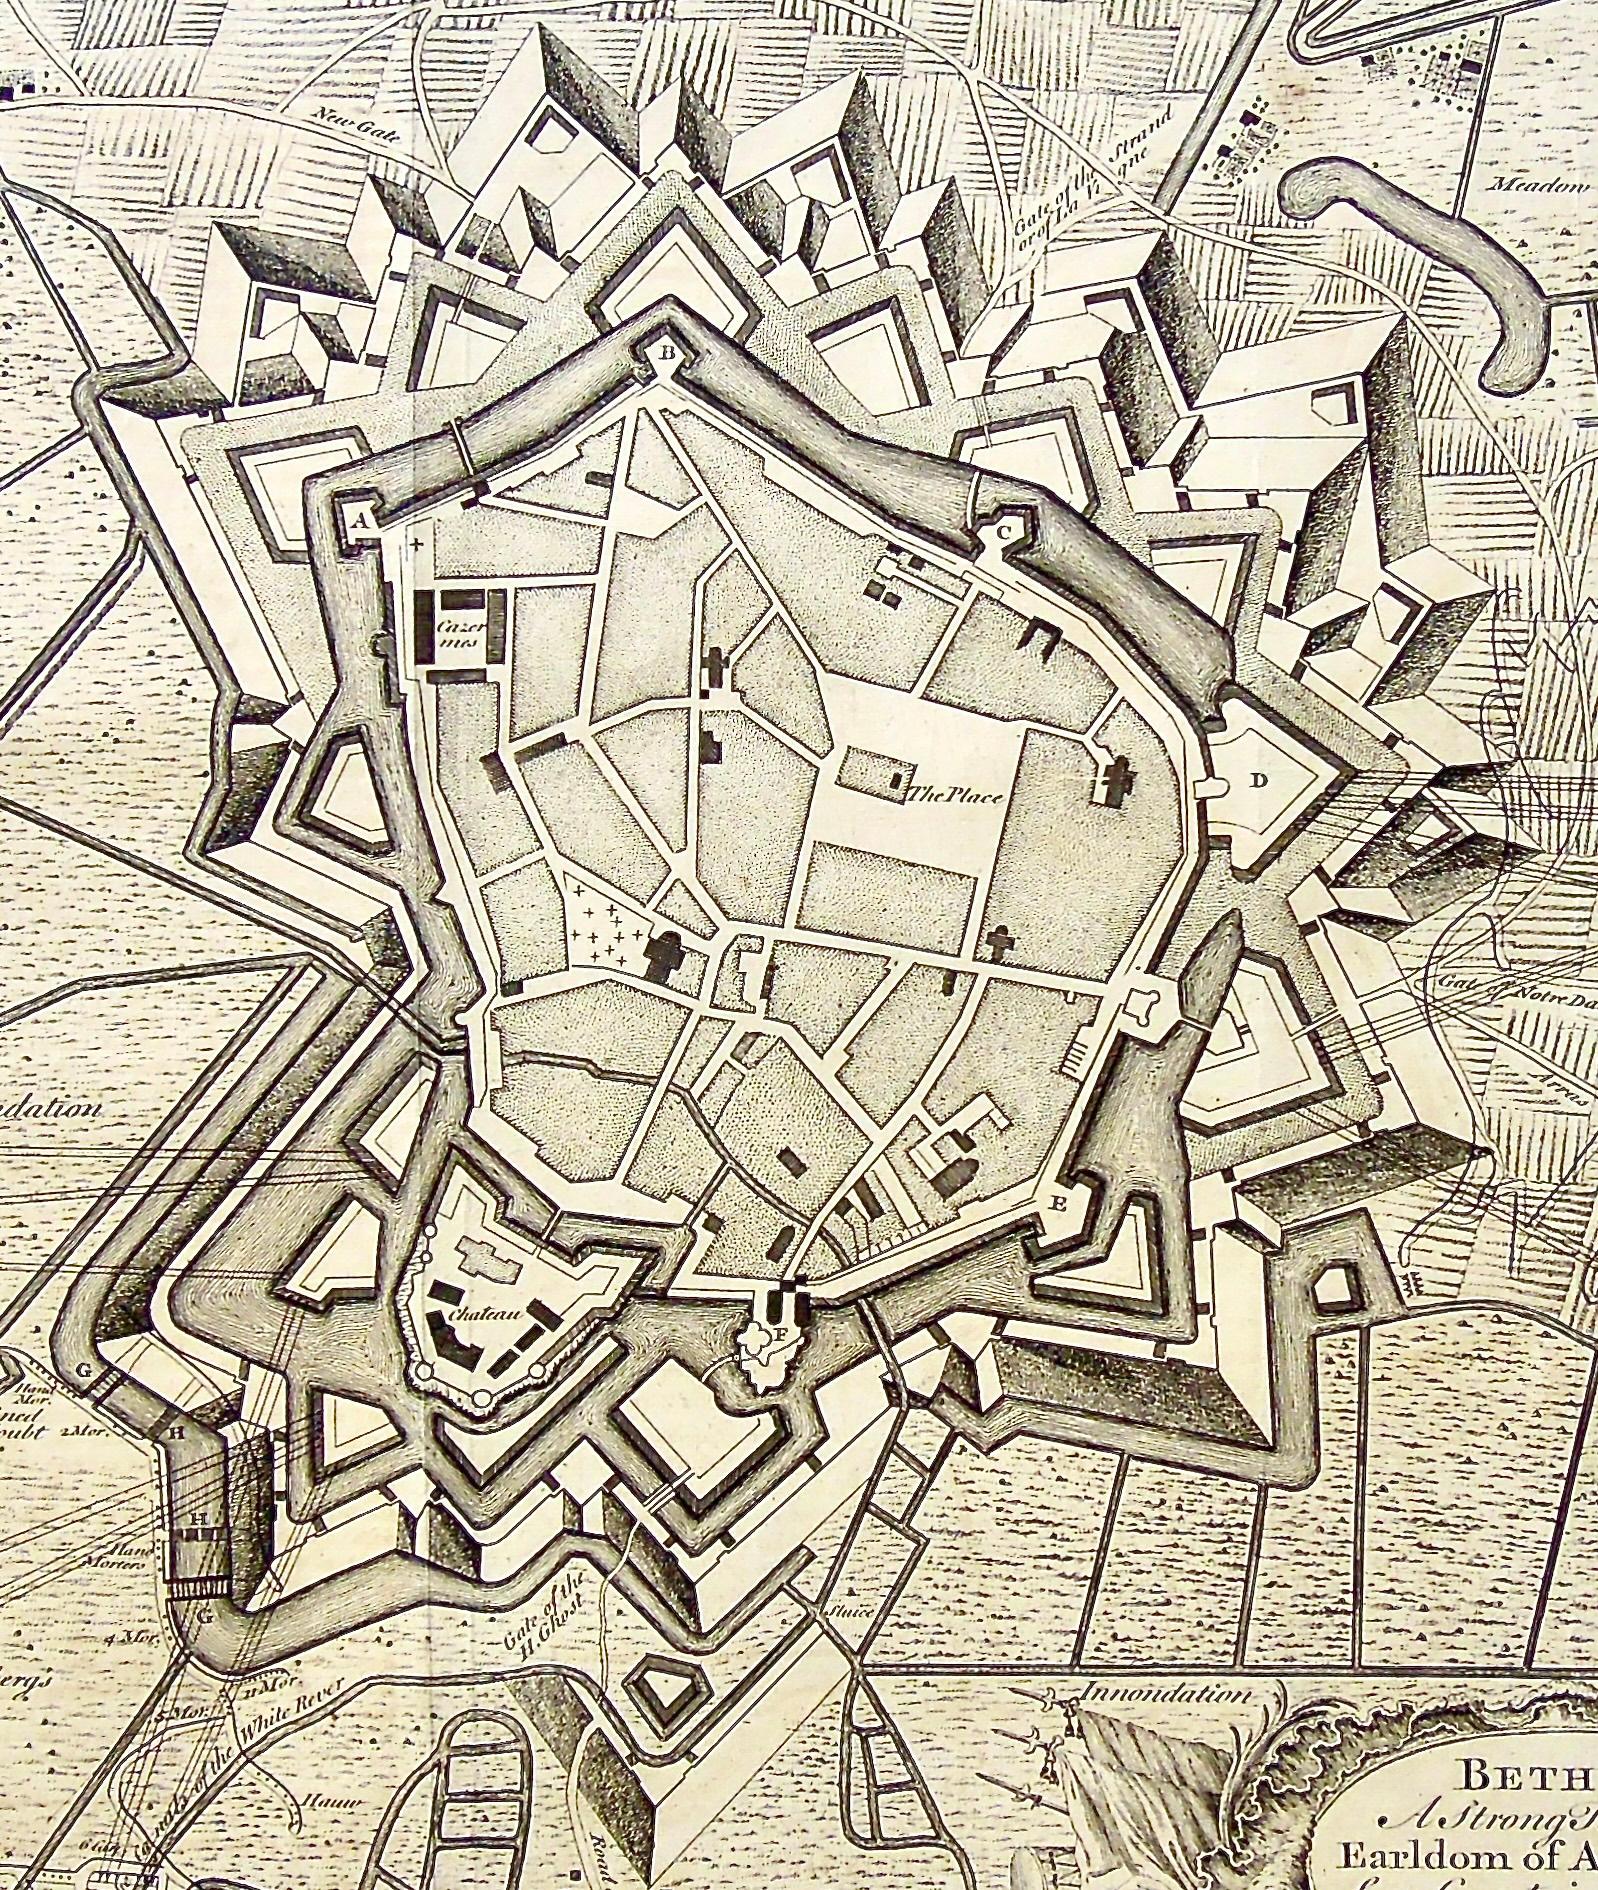 Bethune. A Strong Town in the Earldom of Artois in the Low Countries, Subject to the French. J. Basire Sculp.
Lower Center: Plan of Bethune. For Mr. Tindal's Continuation of Mr. Rapin's History of England. Lower Right: J. Basire Sculp.
Author: Paul